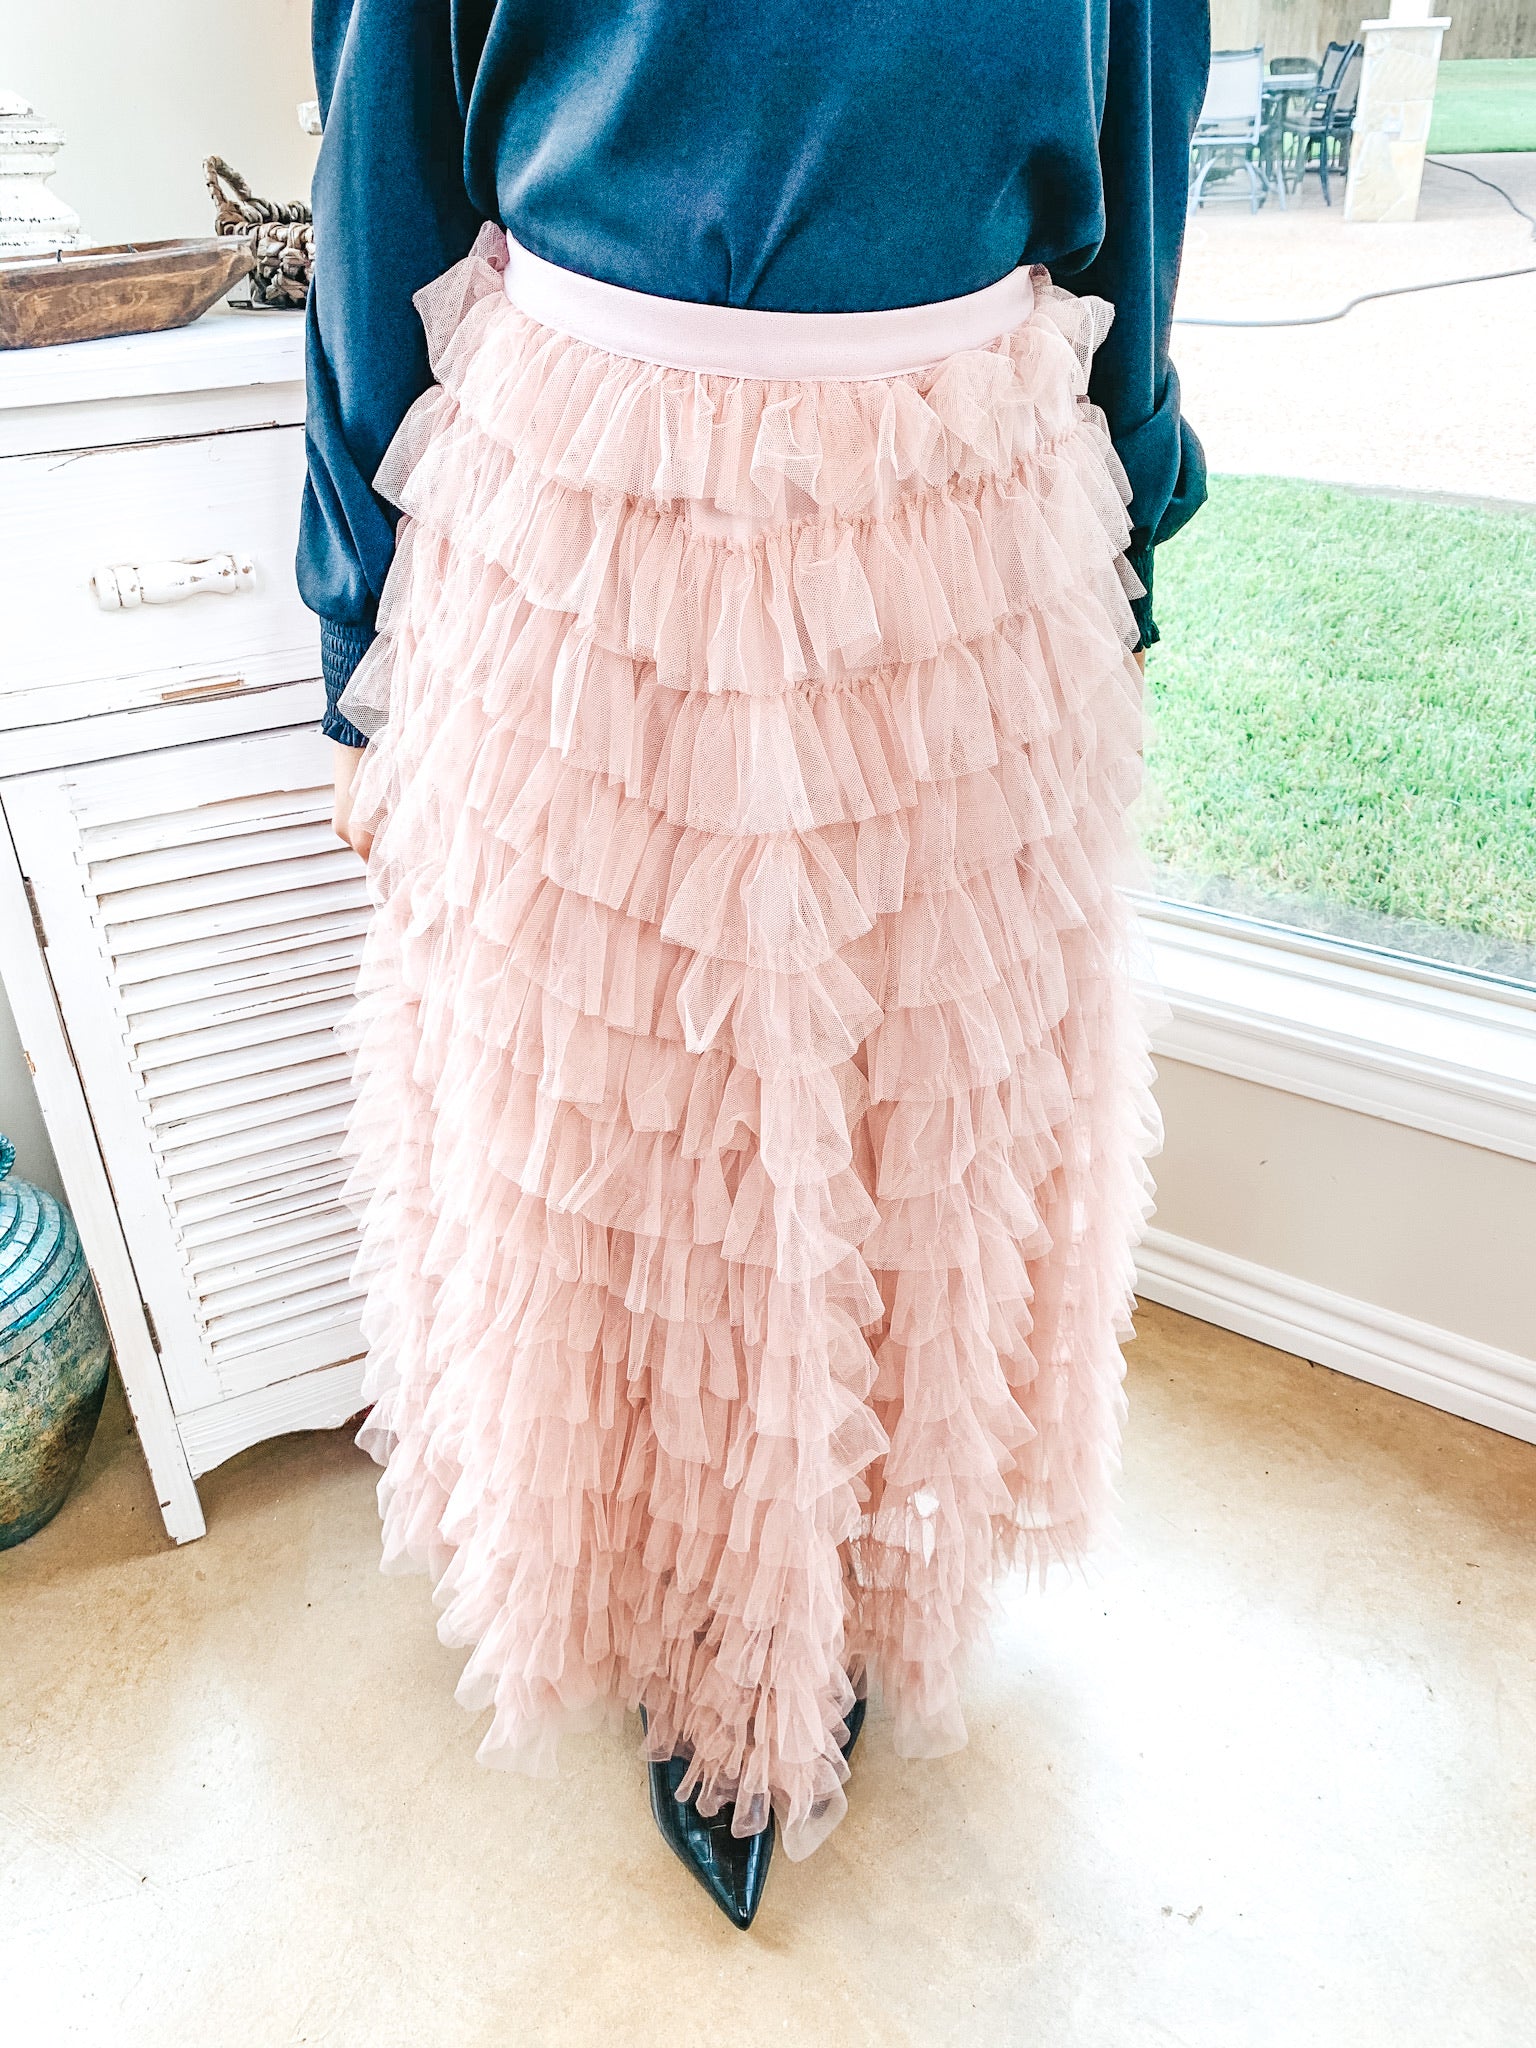 Warm Wishes Ruffle Tulle Maxi Skirt in Blush Pink - Giddy Up Glamour Boutique